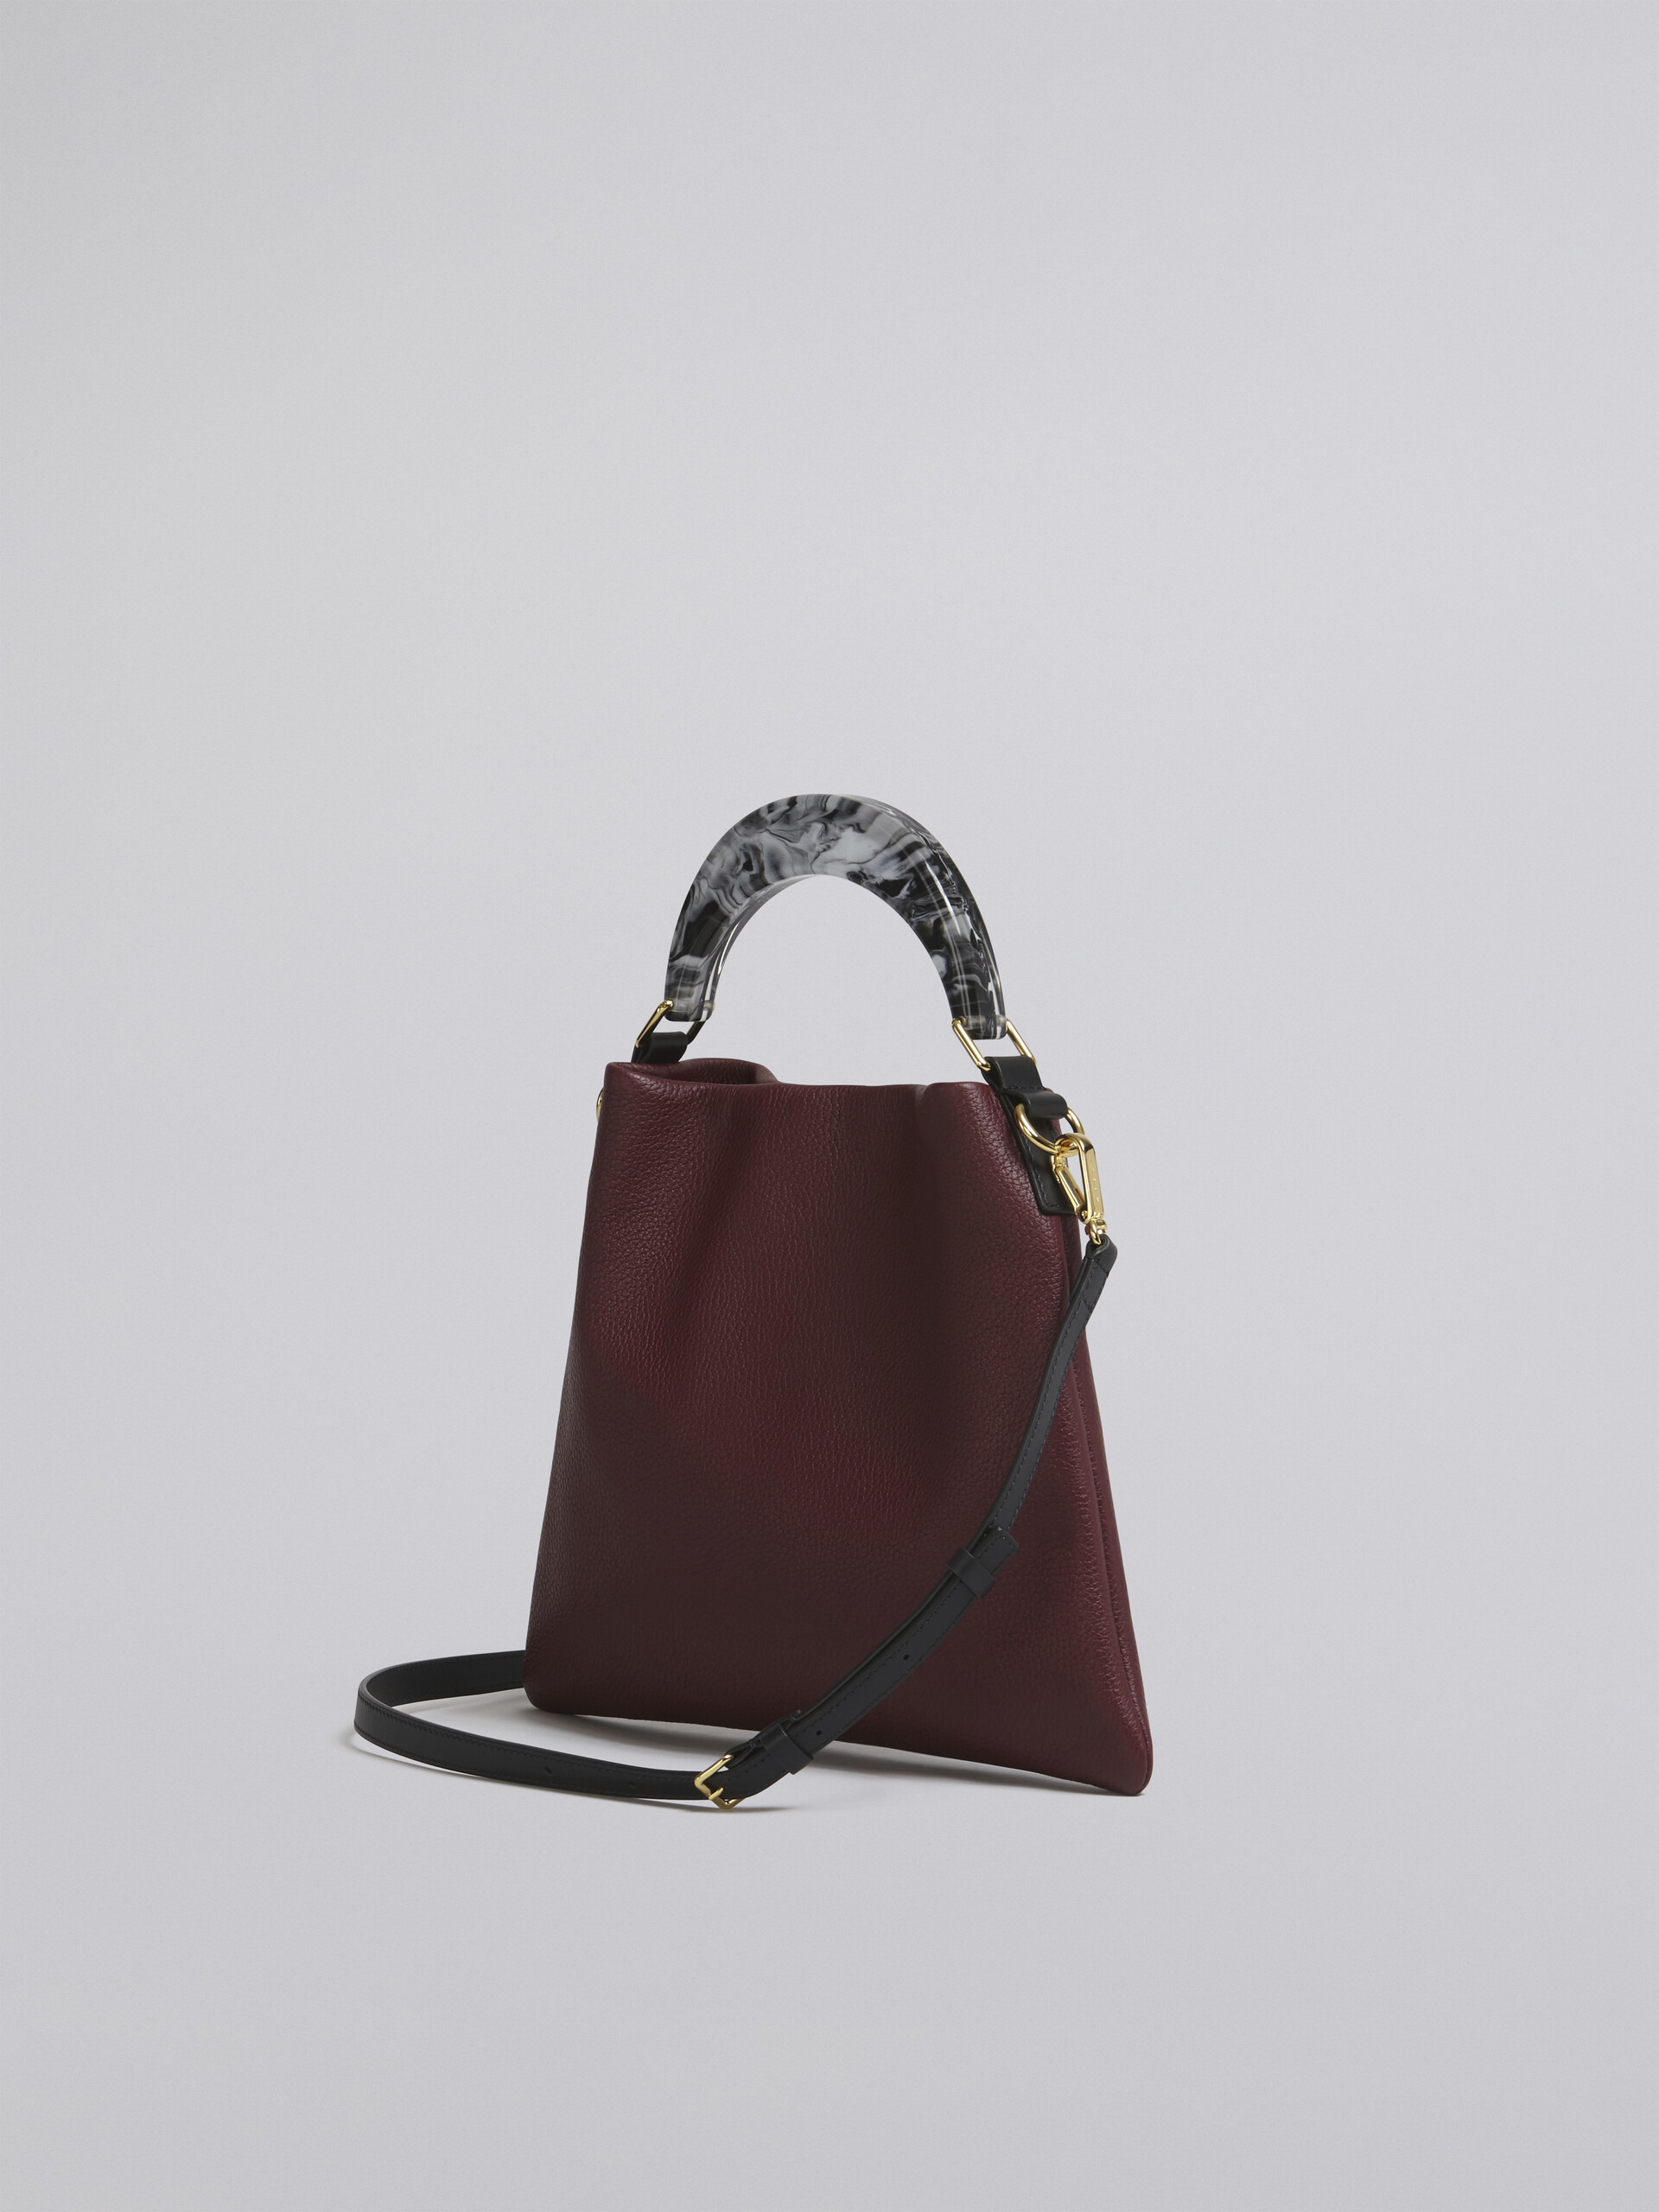 HOBO bag in red grained calfskin and resin handle - Shoulder Bags - Image 3